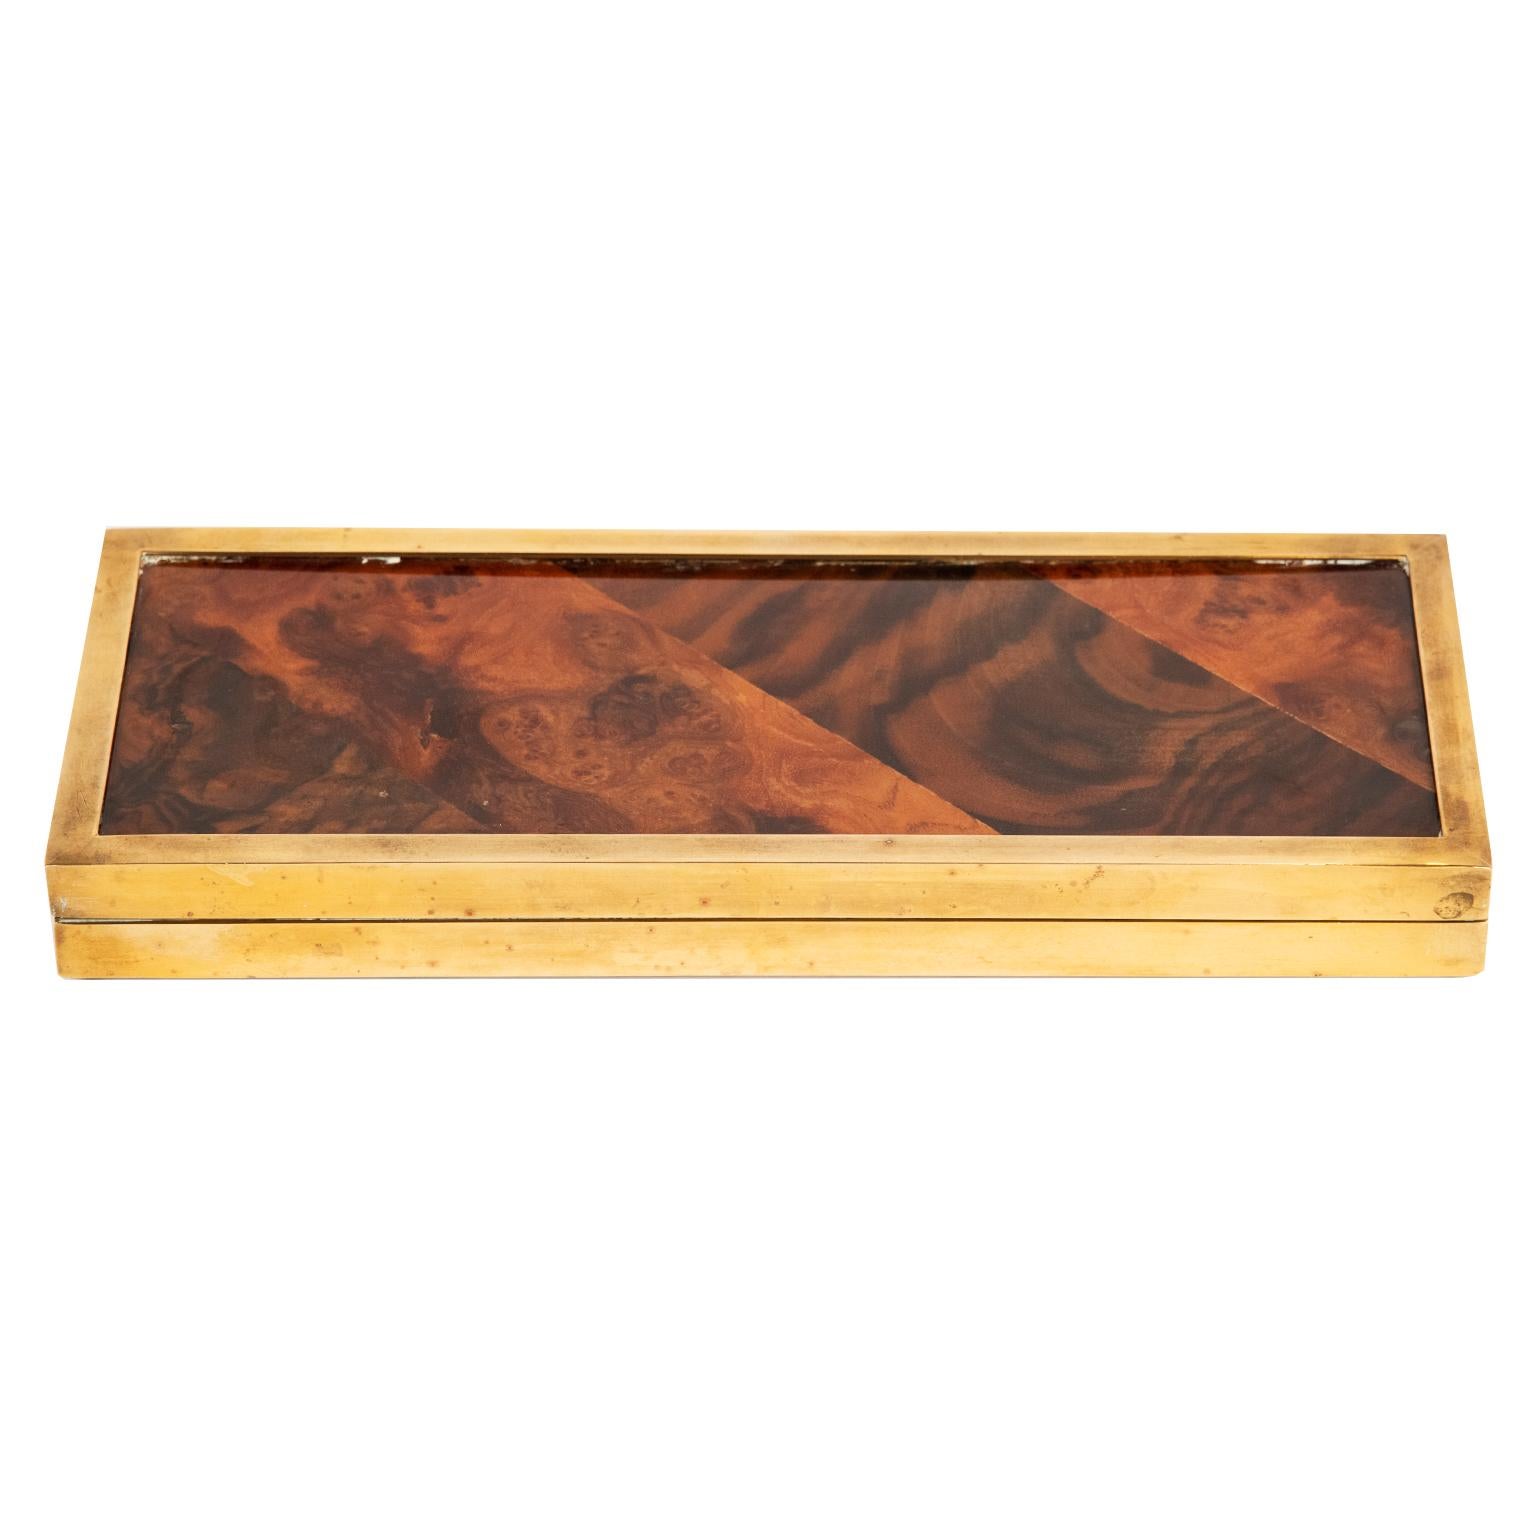 This gorgeous svelte box is made with a rich brown burl wood veneer top over a wood base, brown acrylic base surrounded by a patinated brass frame. The box is unhinged and the top and bottom fit snuggly together.